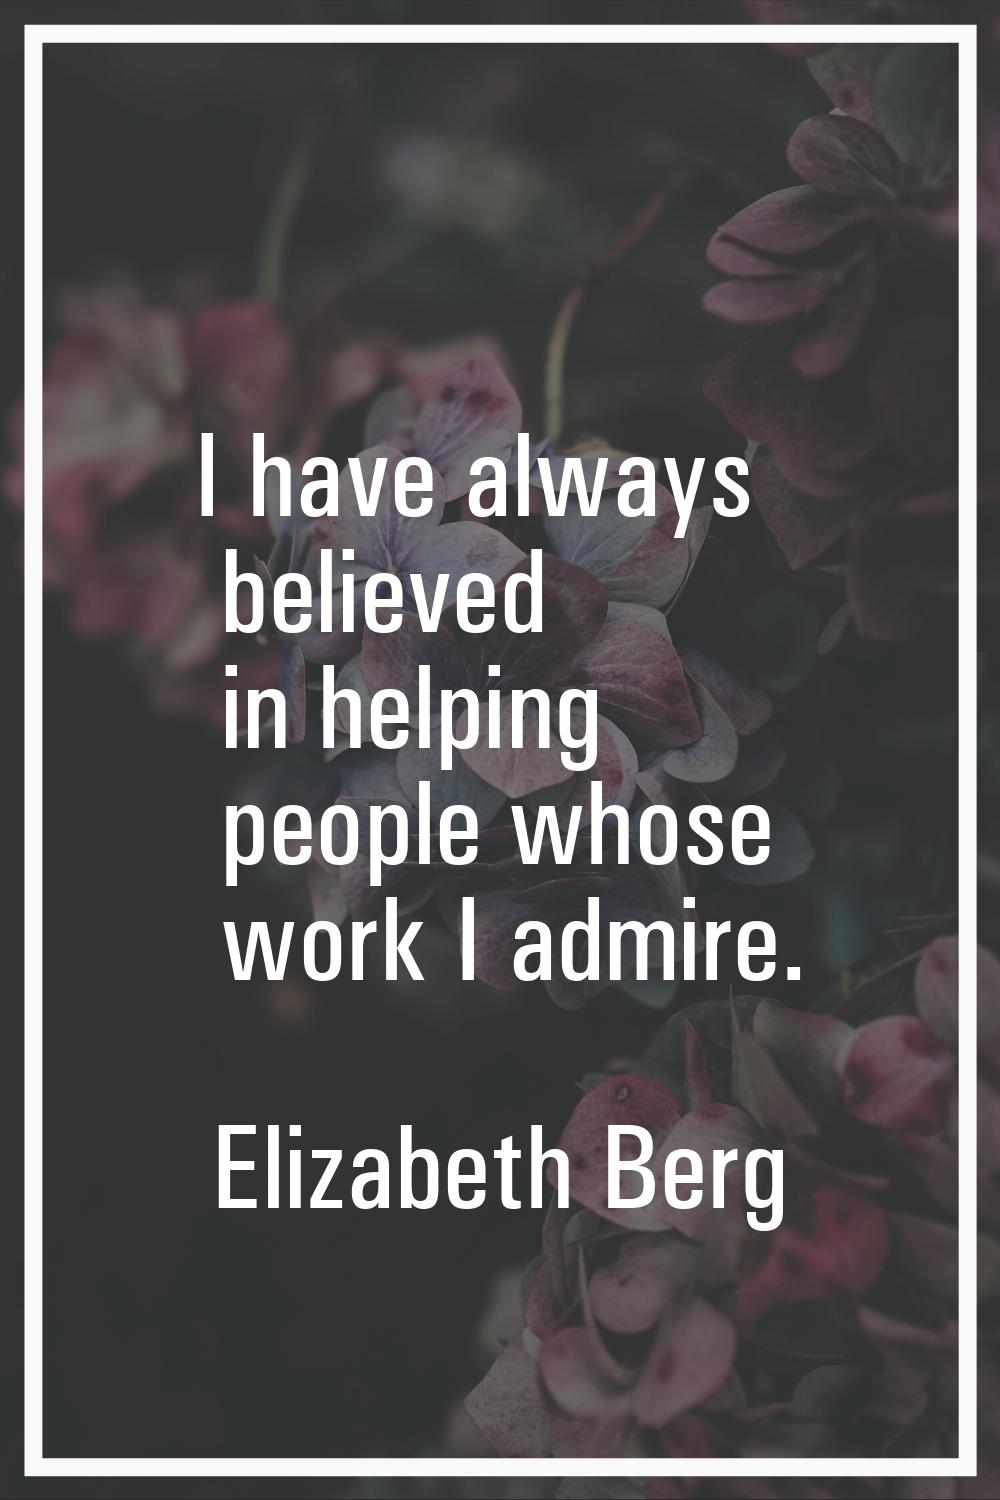 I have always believed in helping people whose work I admire.